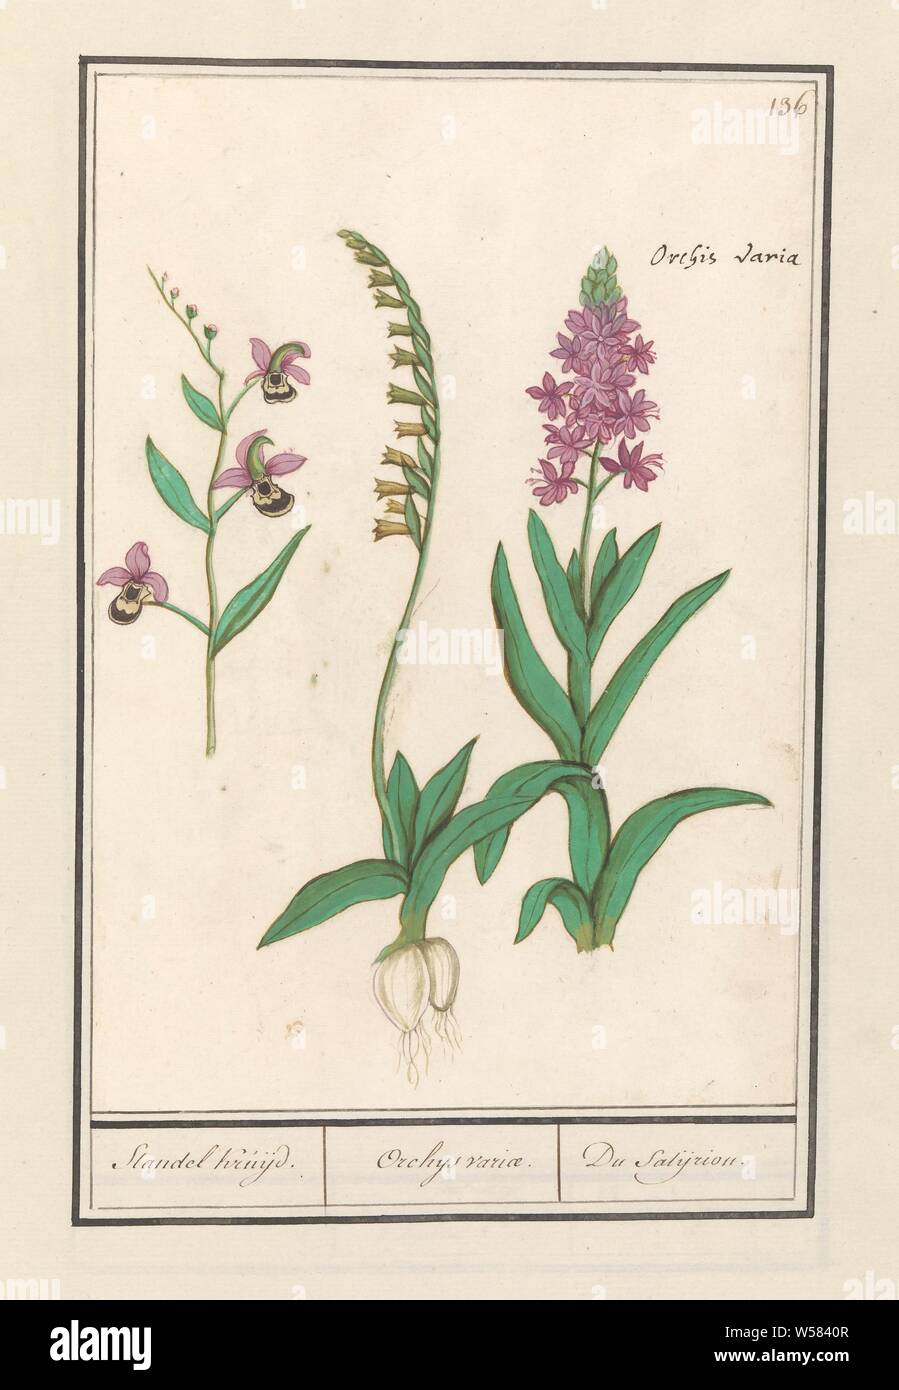 Orchid (Orchidaceae) Standel Kruijd. / Orchys variety. / Du Satijrion. (title on object), Three orchids. Numbered top right: 136. Top right the Latin name. Part of the second album with drawings of flowers and plants. Ninth of twelve albums with drawings of animals, birds and plants known around 1600, commissioned by Emperor Rudolf II. With explanation in Dutch, Latin and French., Flowers: orchid, Anselmus Boetius de Boodt, 1596 - 1610, paper, watercolor (paint), deck paint, ink, chalk, pen, h 246 mm × w 169 mm Stock Photo